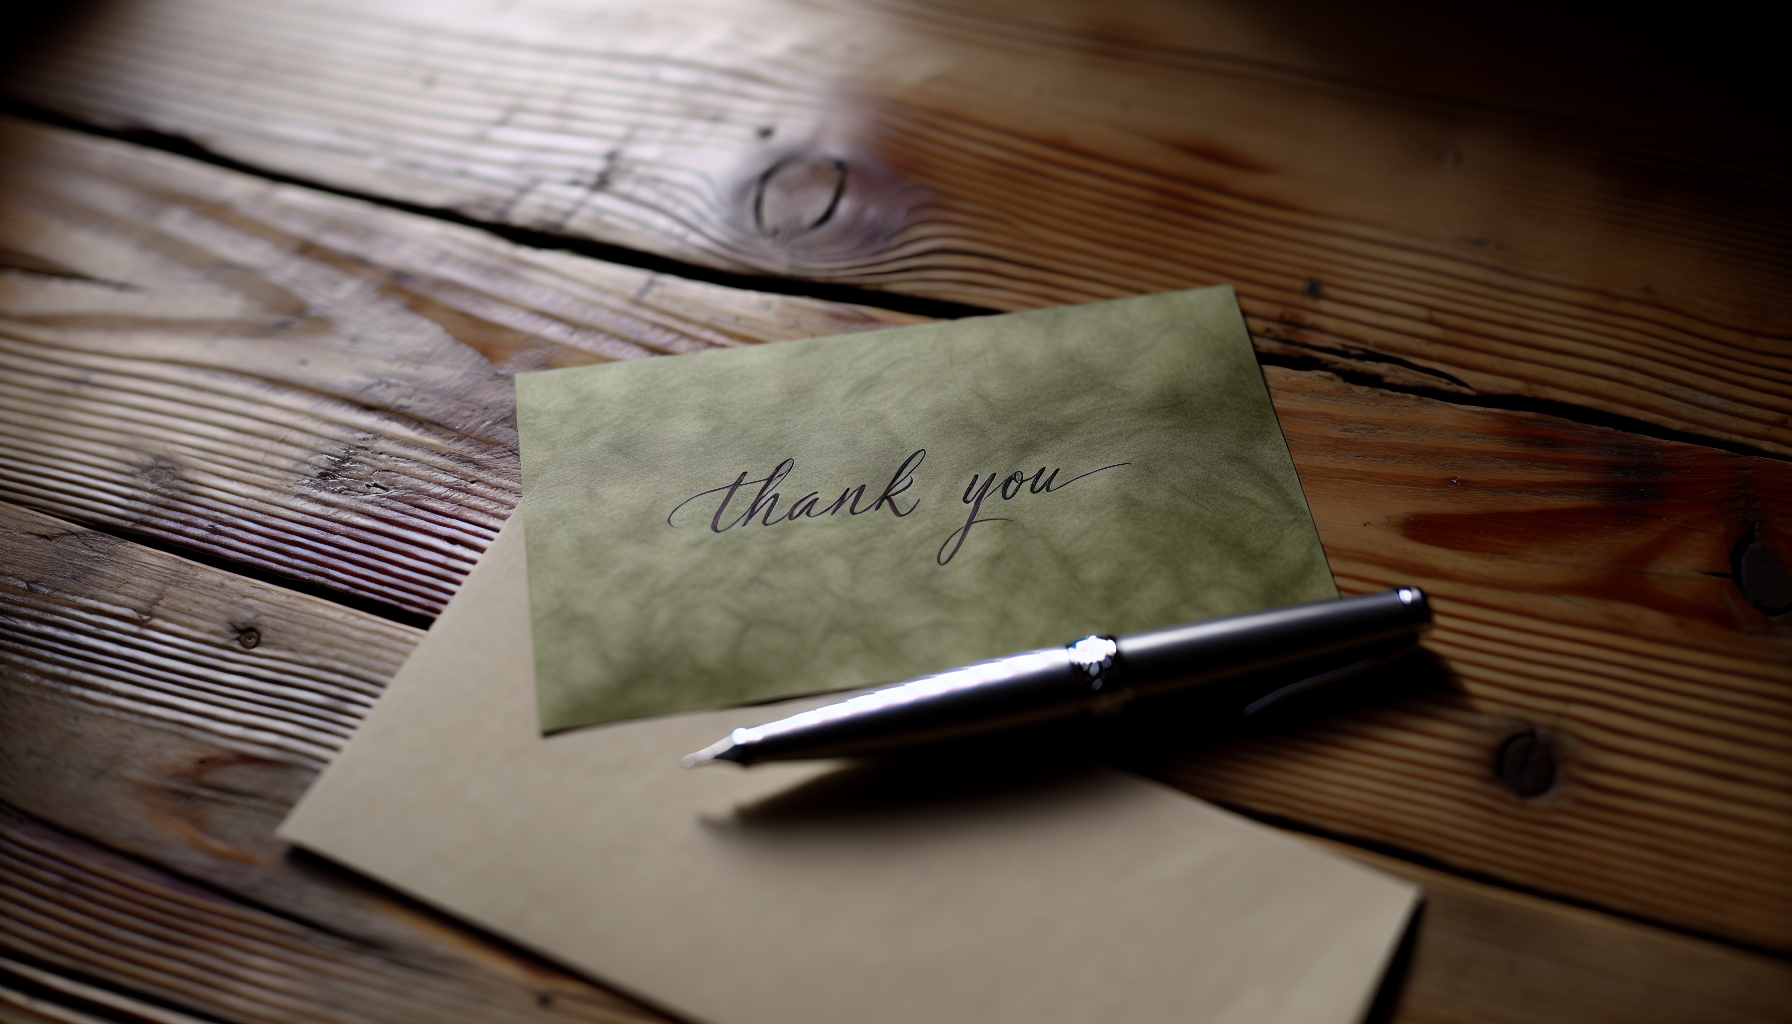 Handwritten thank you note and pen on a table